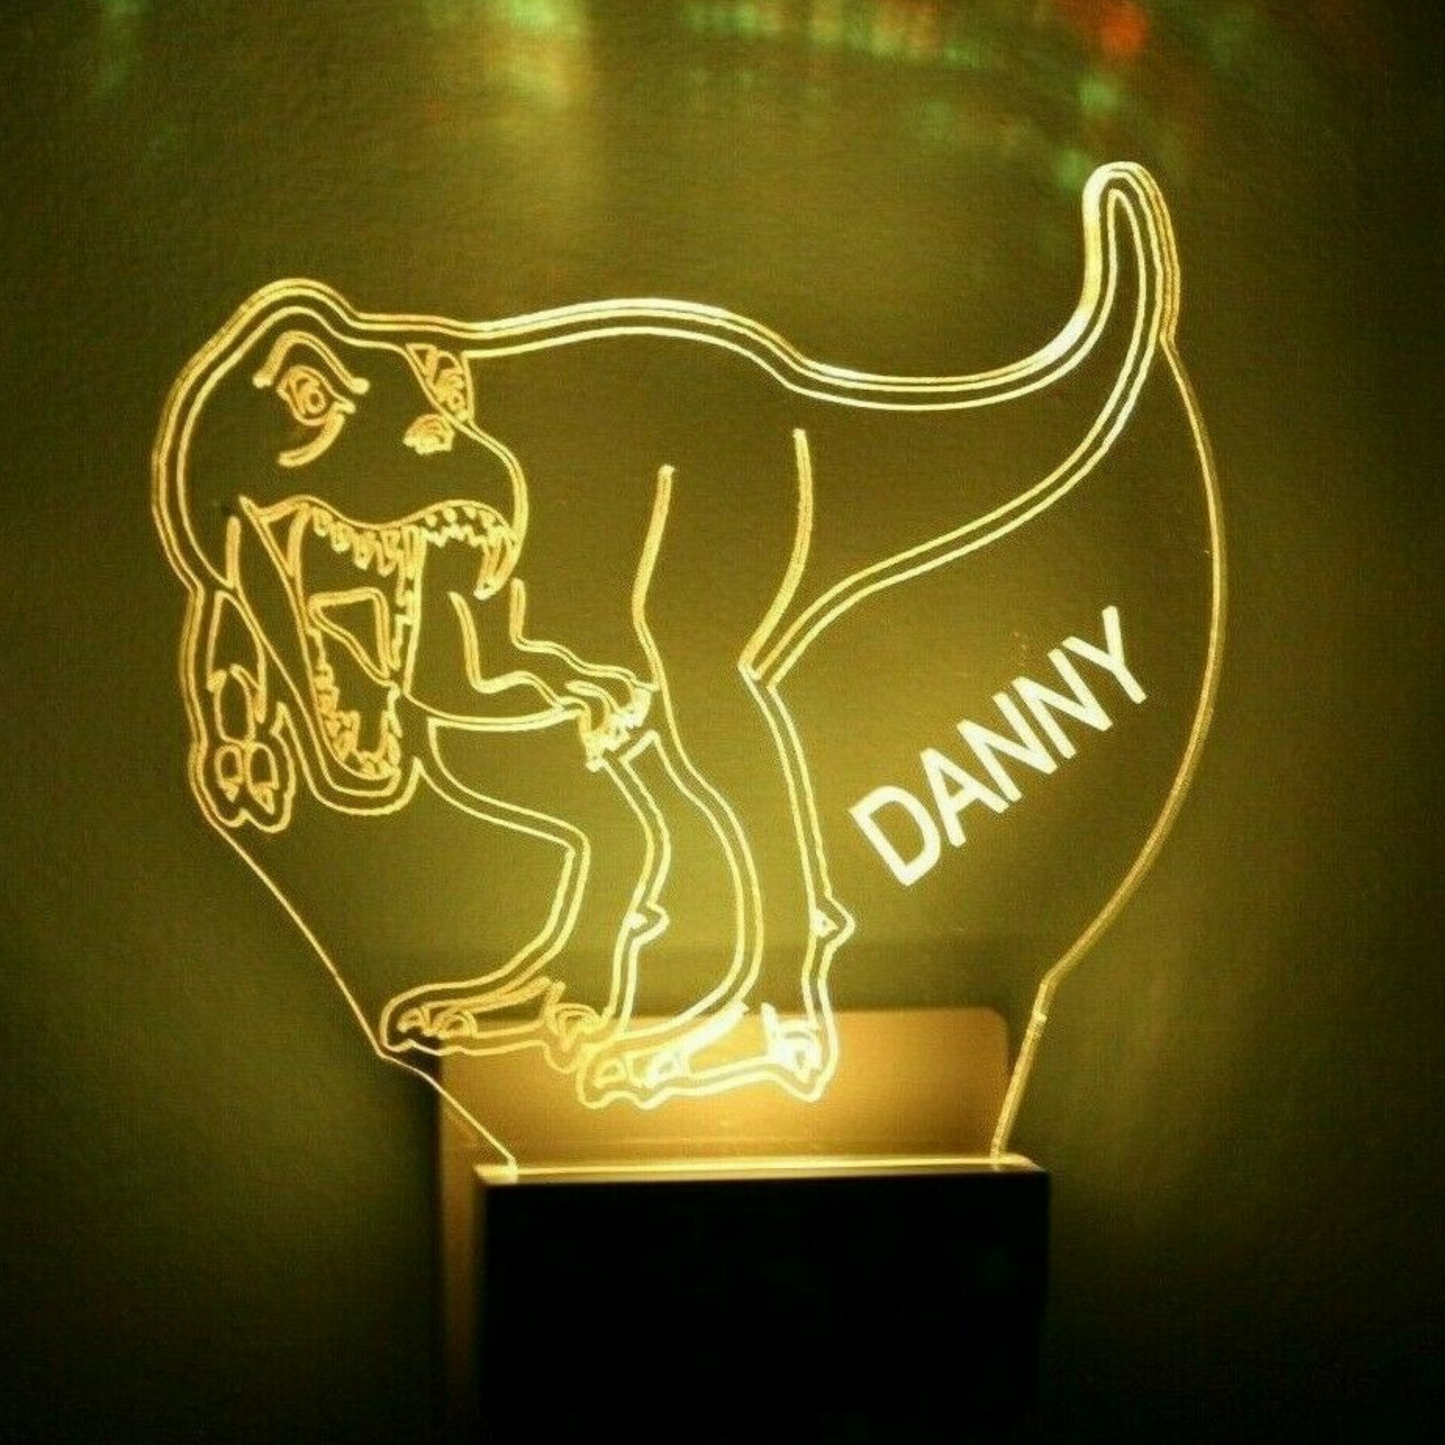 Dinosaur Night Light Multi Color Personalized LED Wall Plug-in, Cool-Touch Smart Dusk to Dawn Sensor, Bedroom, Hallway, Bathroom, Super Cool